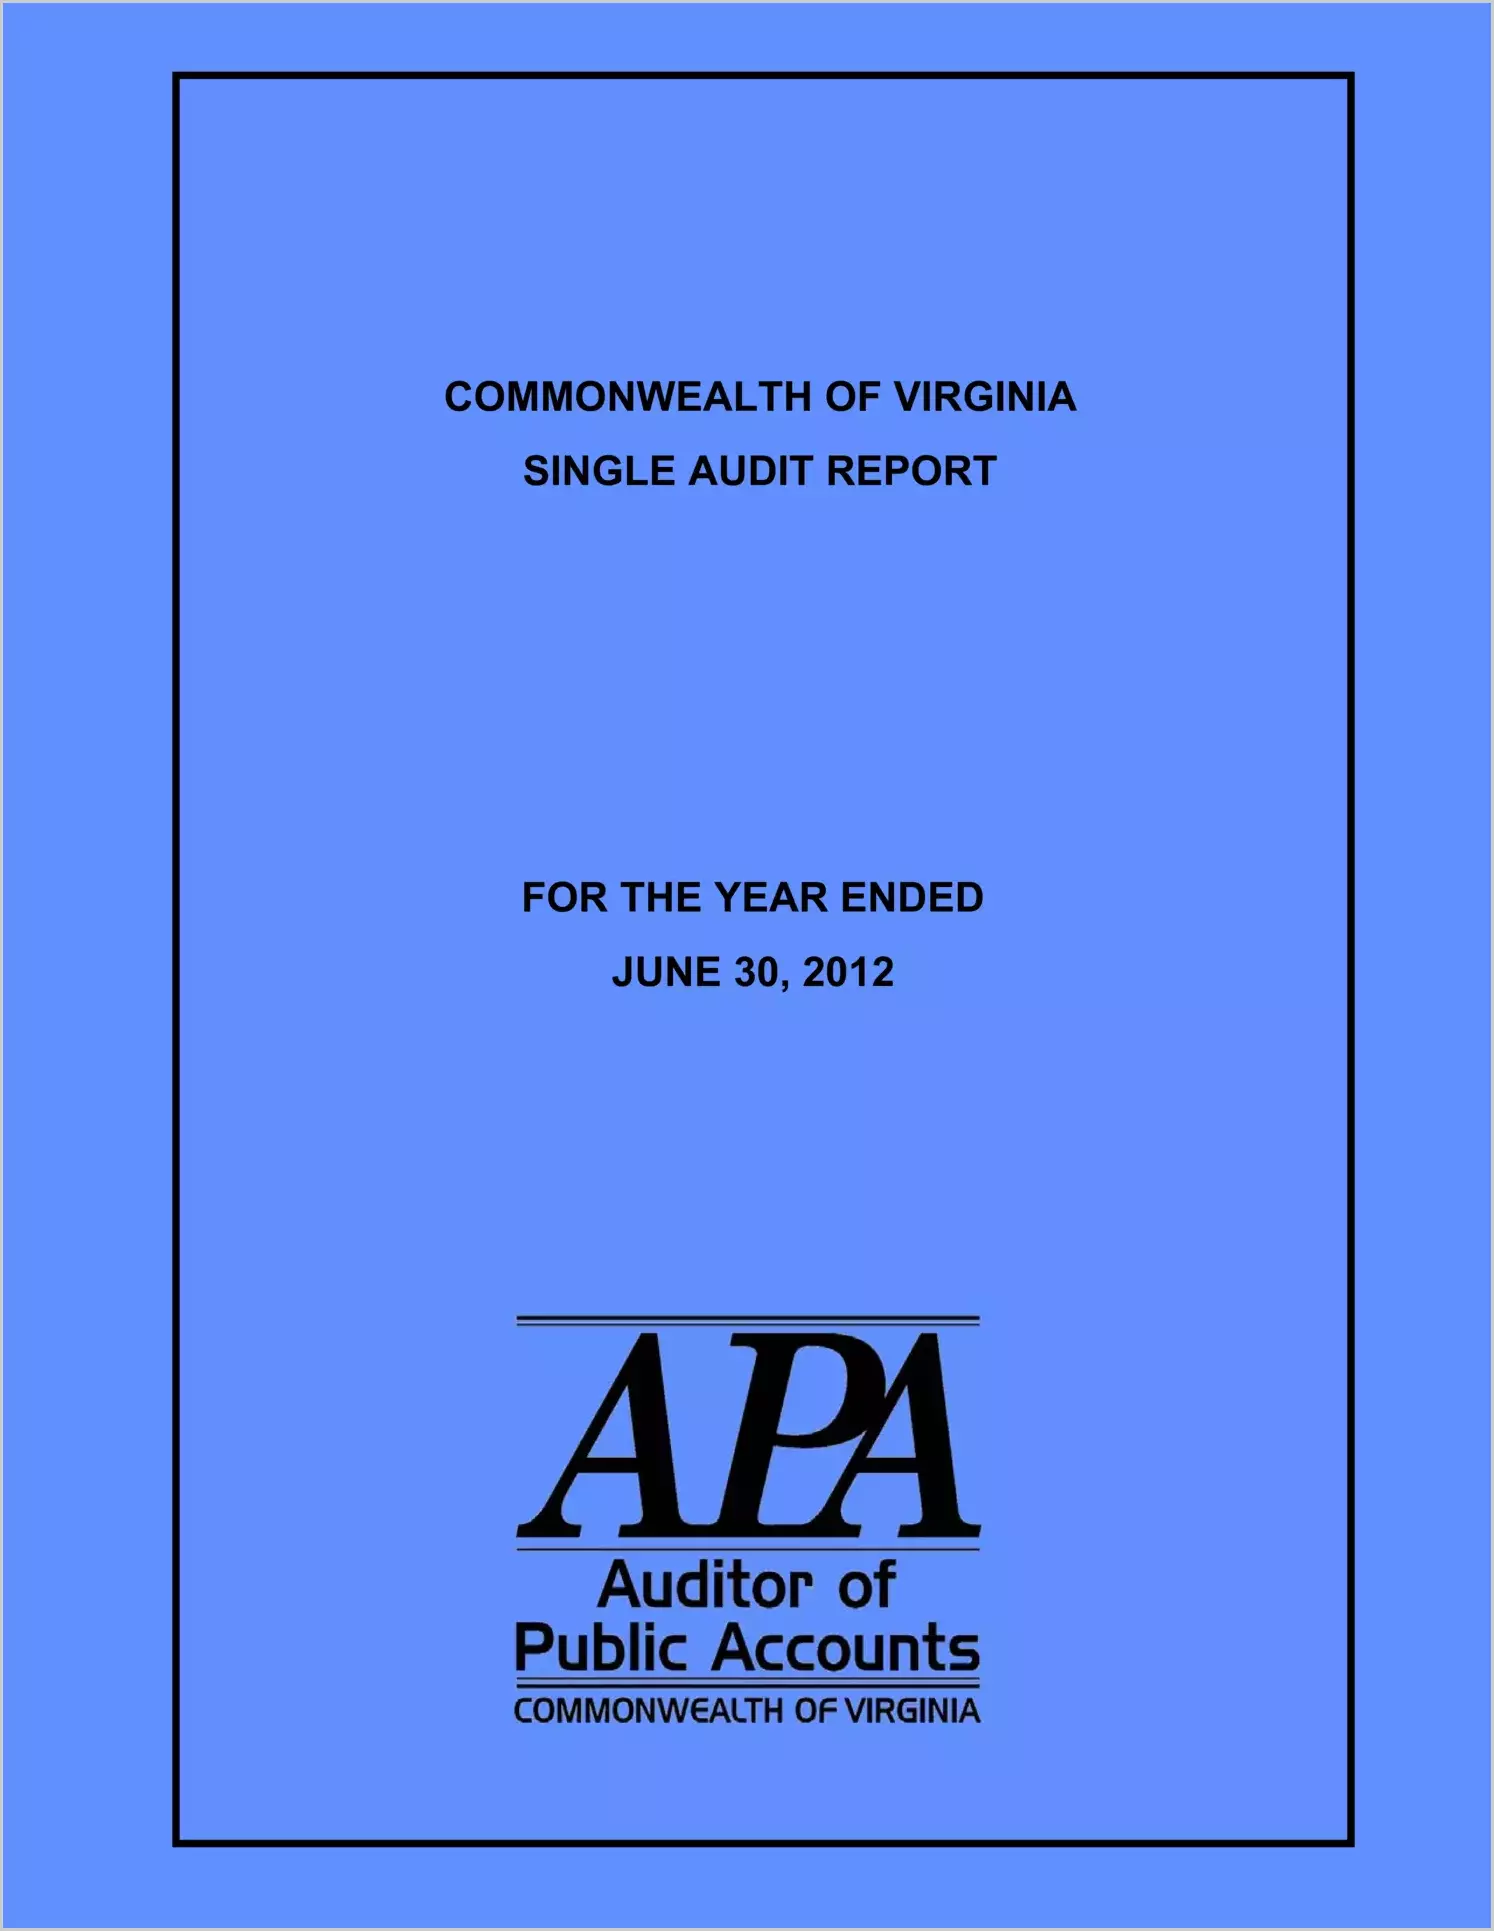 Commonwealth of Virginia Single Audit Report for the Year Ended June 30, 2012